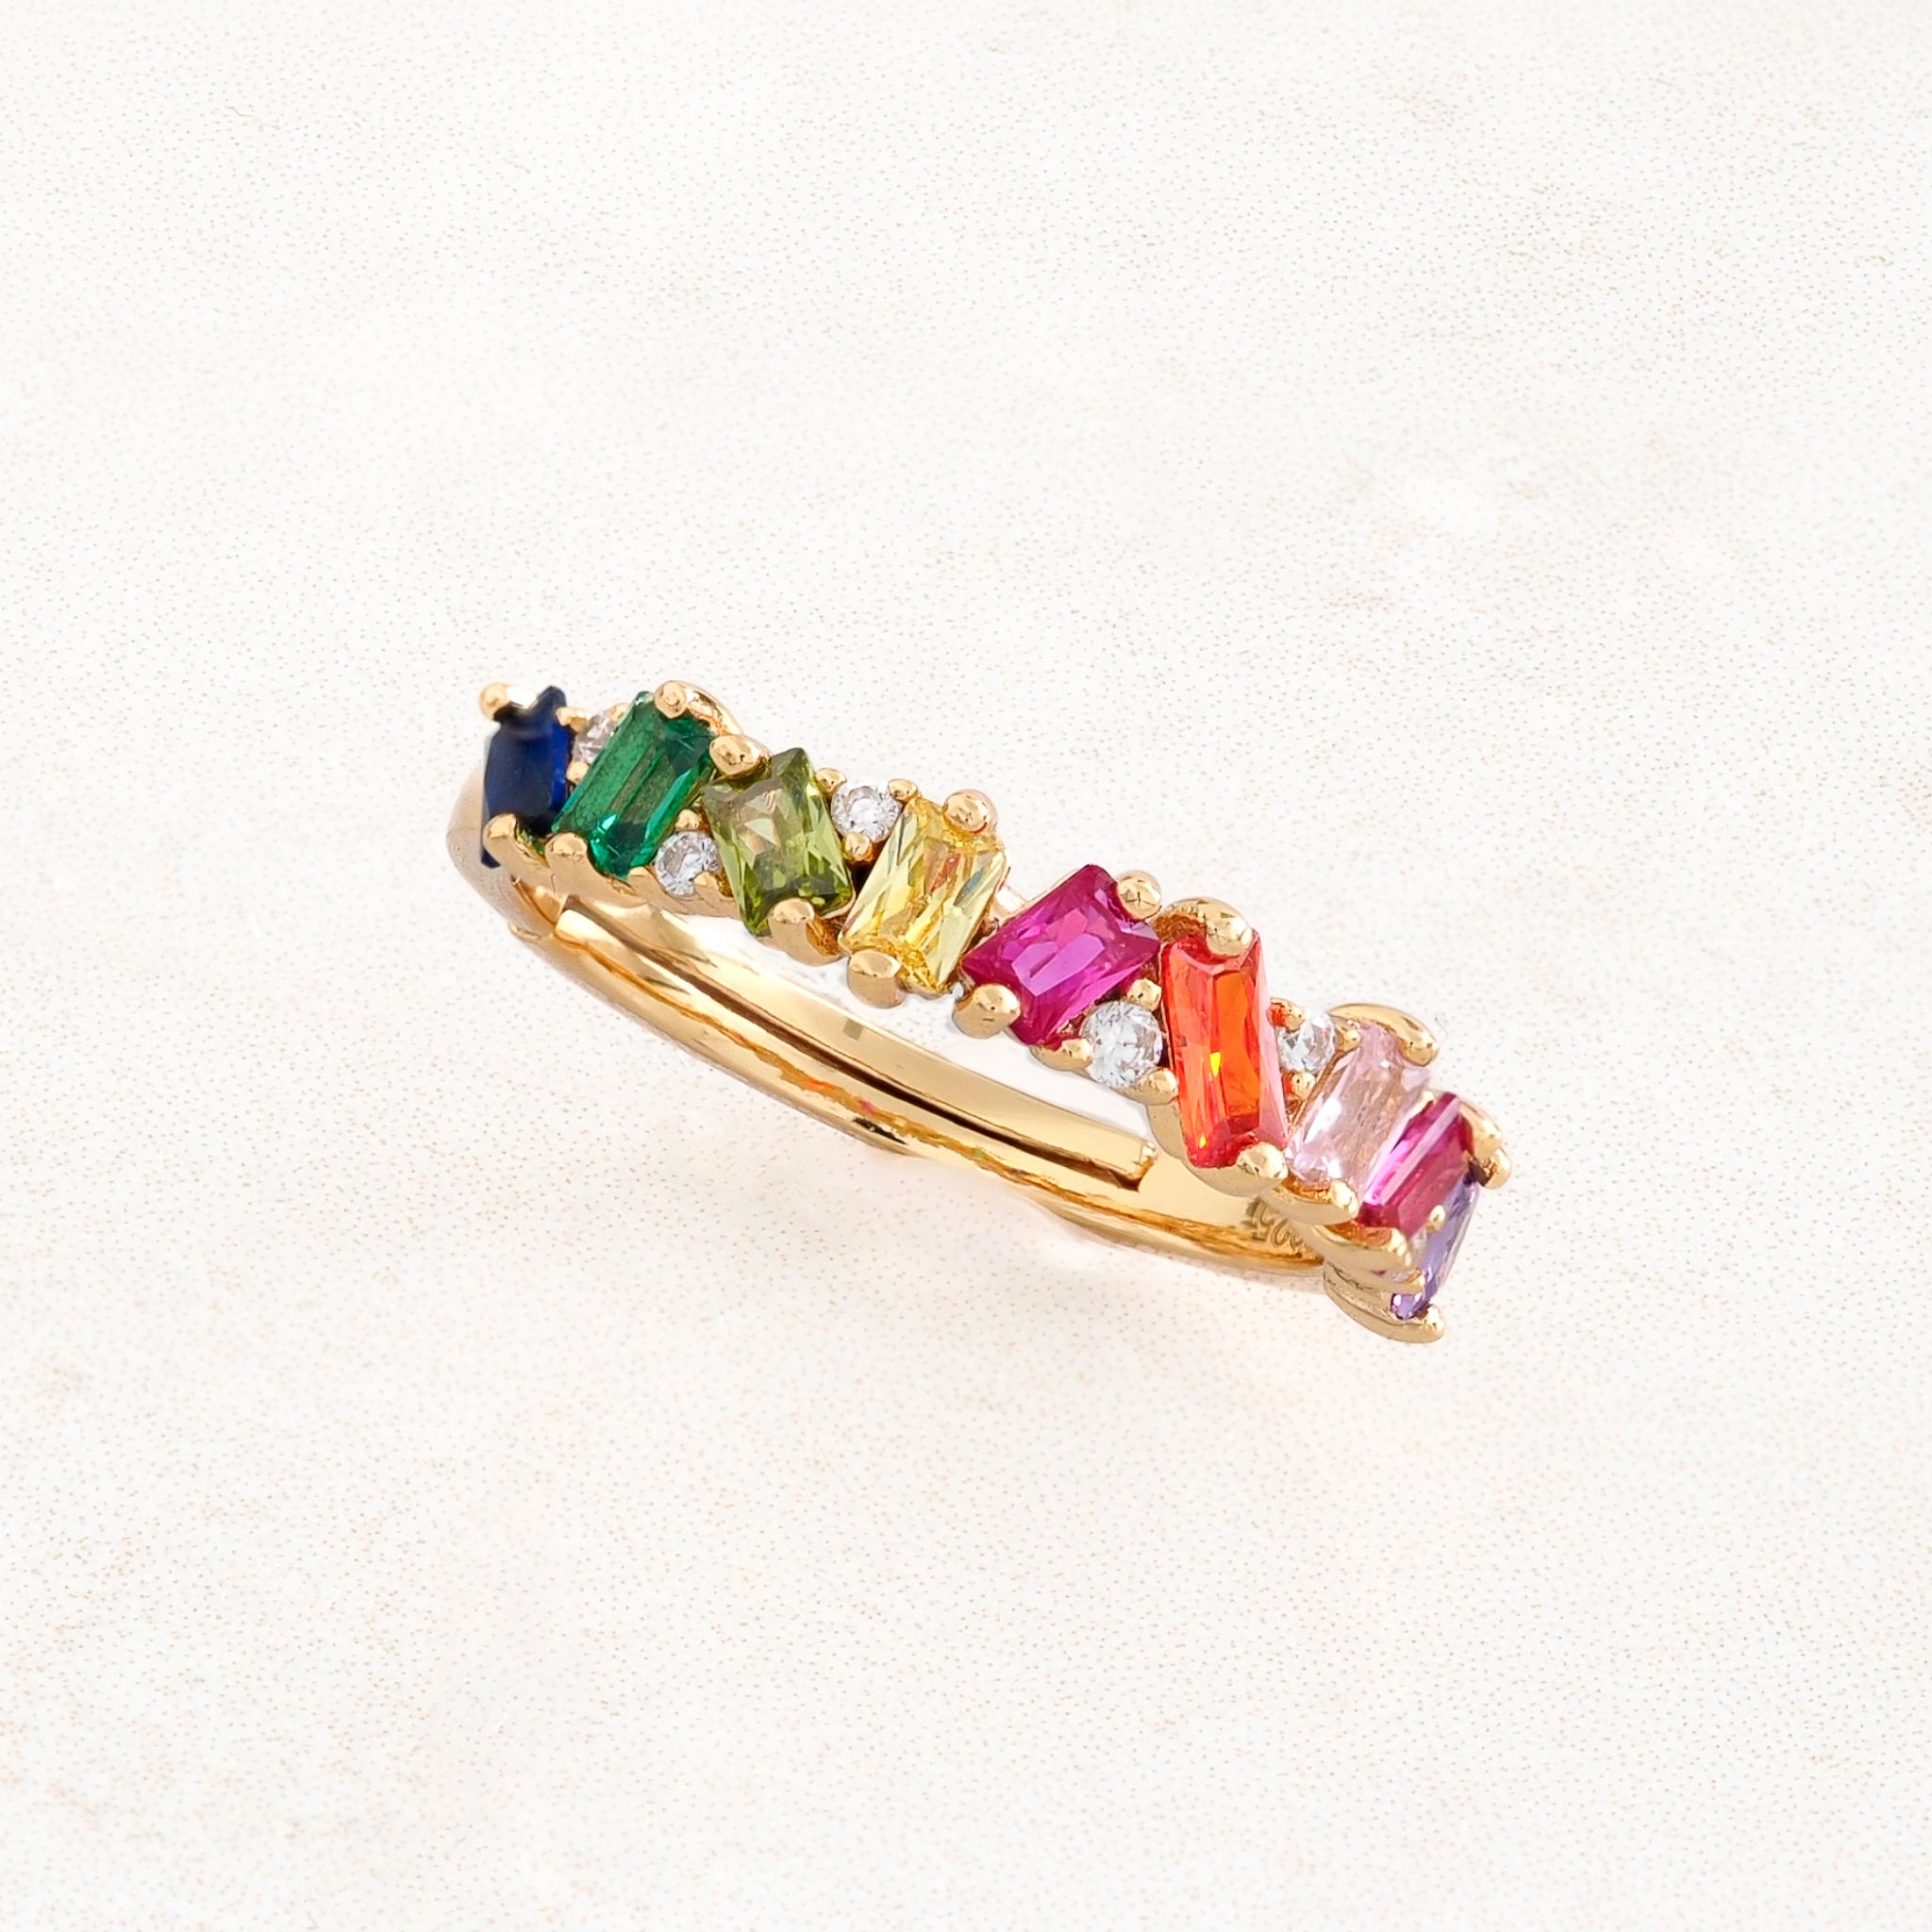 rainbow pride ring with collision design featuring stones with rainbow pride flag colours, angled